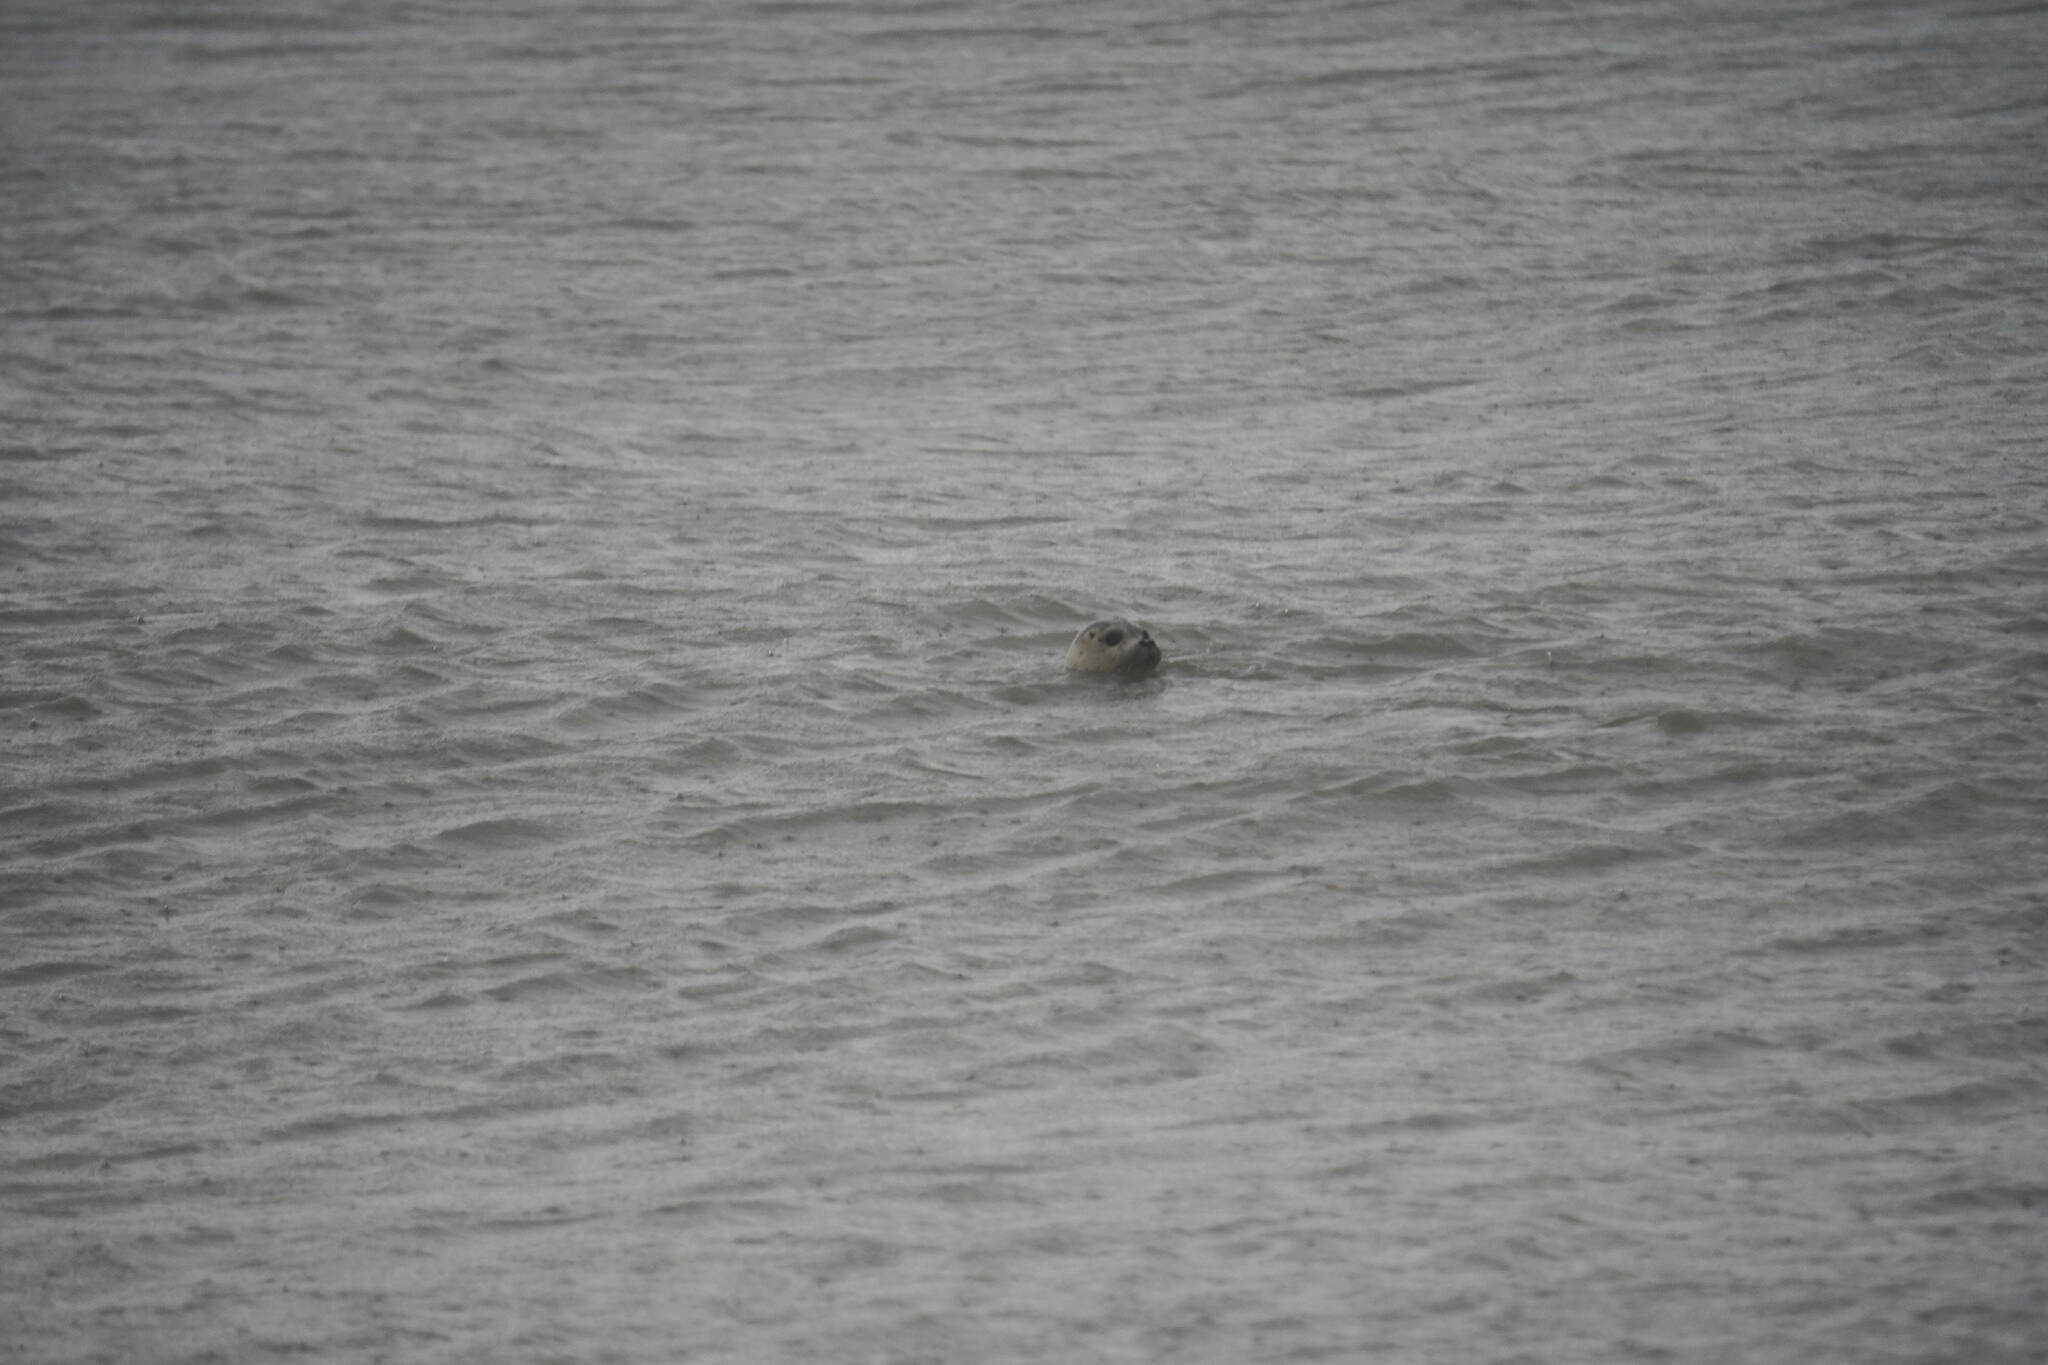 A harbor seal rescued earlier this year by the Alaska SeaLife Center, Tuber, looks back from the waters of Cook Inlet after being released on the Kenai Beach in Kenai, Alaska, on Thursday, Sept. 7, 2023. (Jake Dye/Peninsula Clarion)